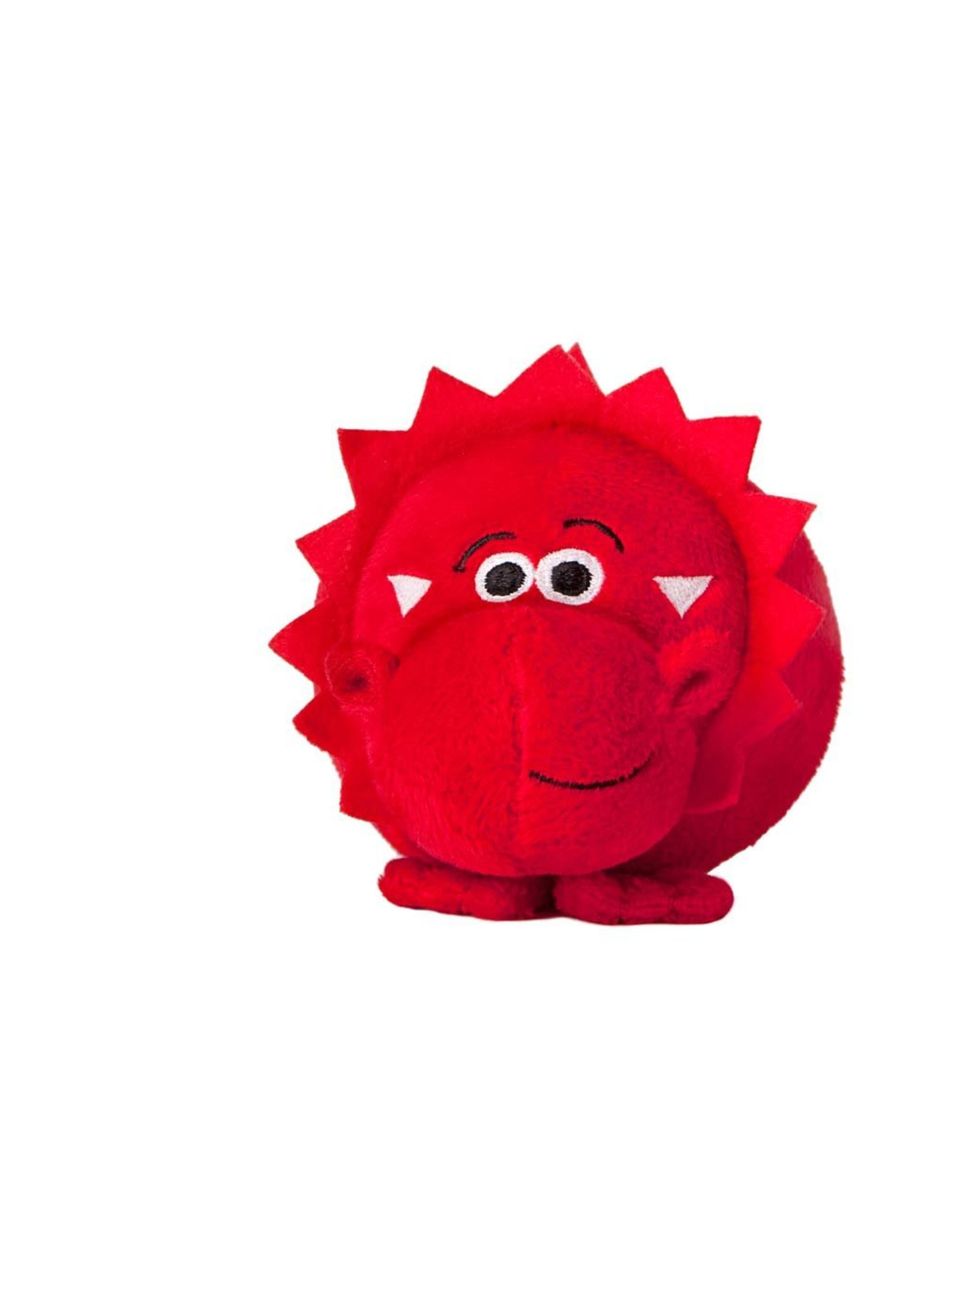 <p>The Dinoroars toy, £3 (with at least £1.50 going to Comic Relief), available from <a href="http://www.sainsburys.co.uk/sol/index.jsp?GLOBAL_DATA._searchType=0">Sainsbury's</a></p>